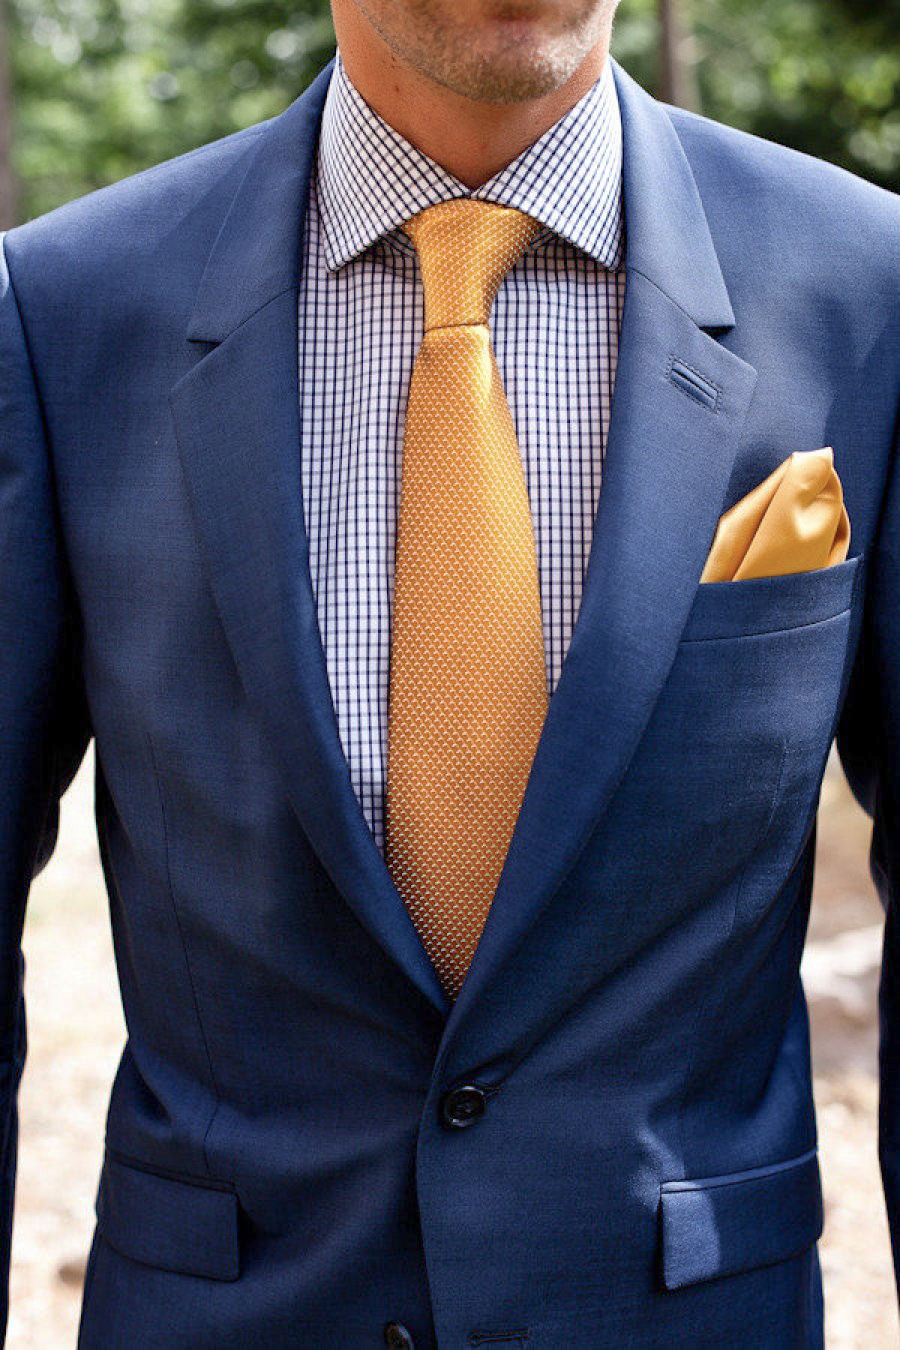 Gingham Shirt With Navy Suit